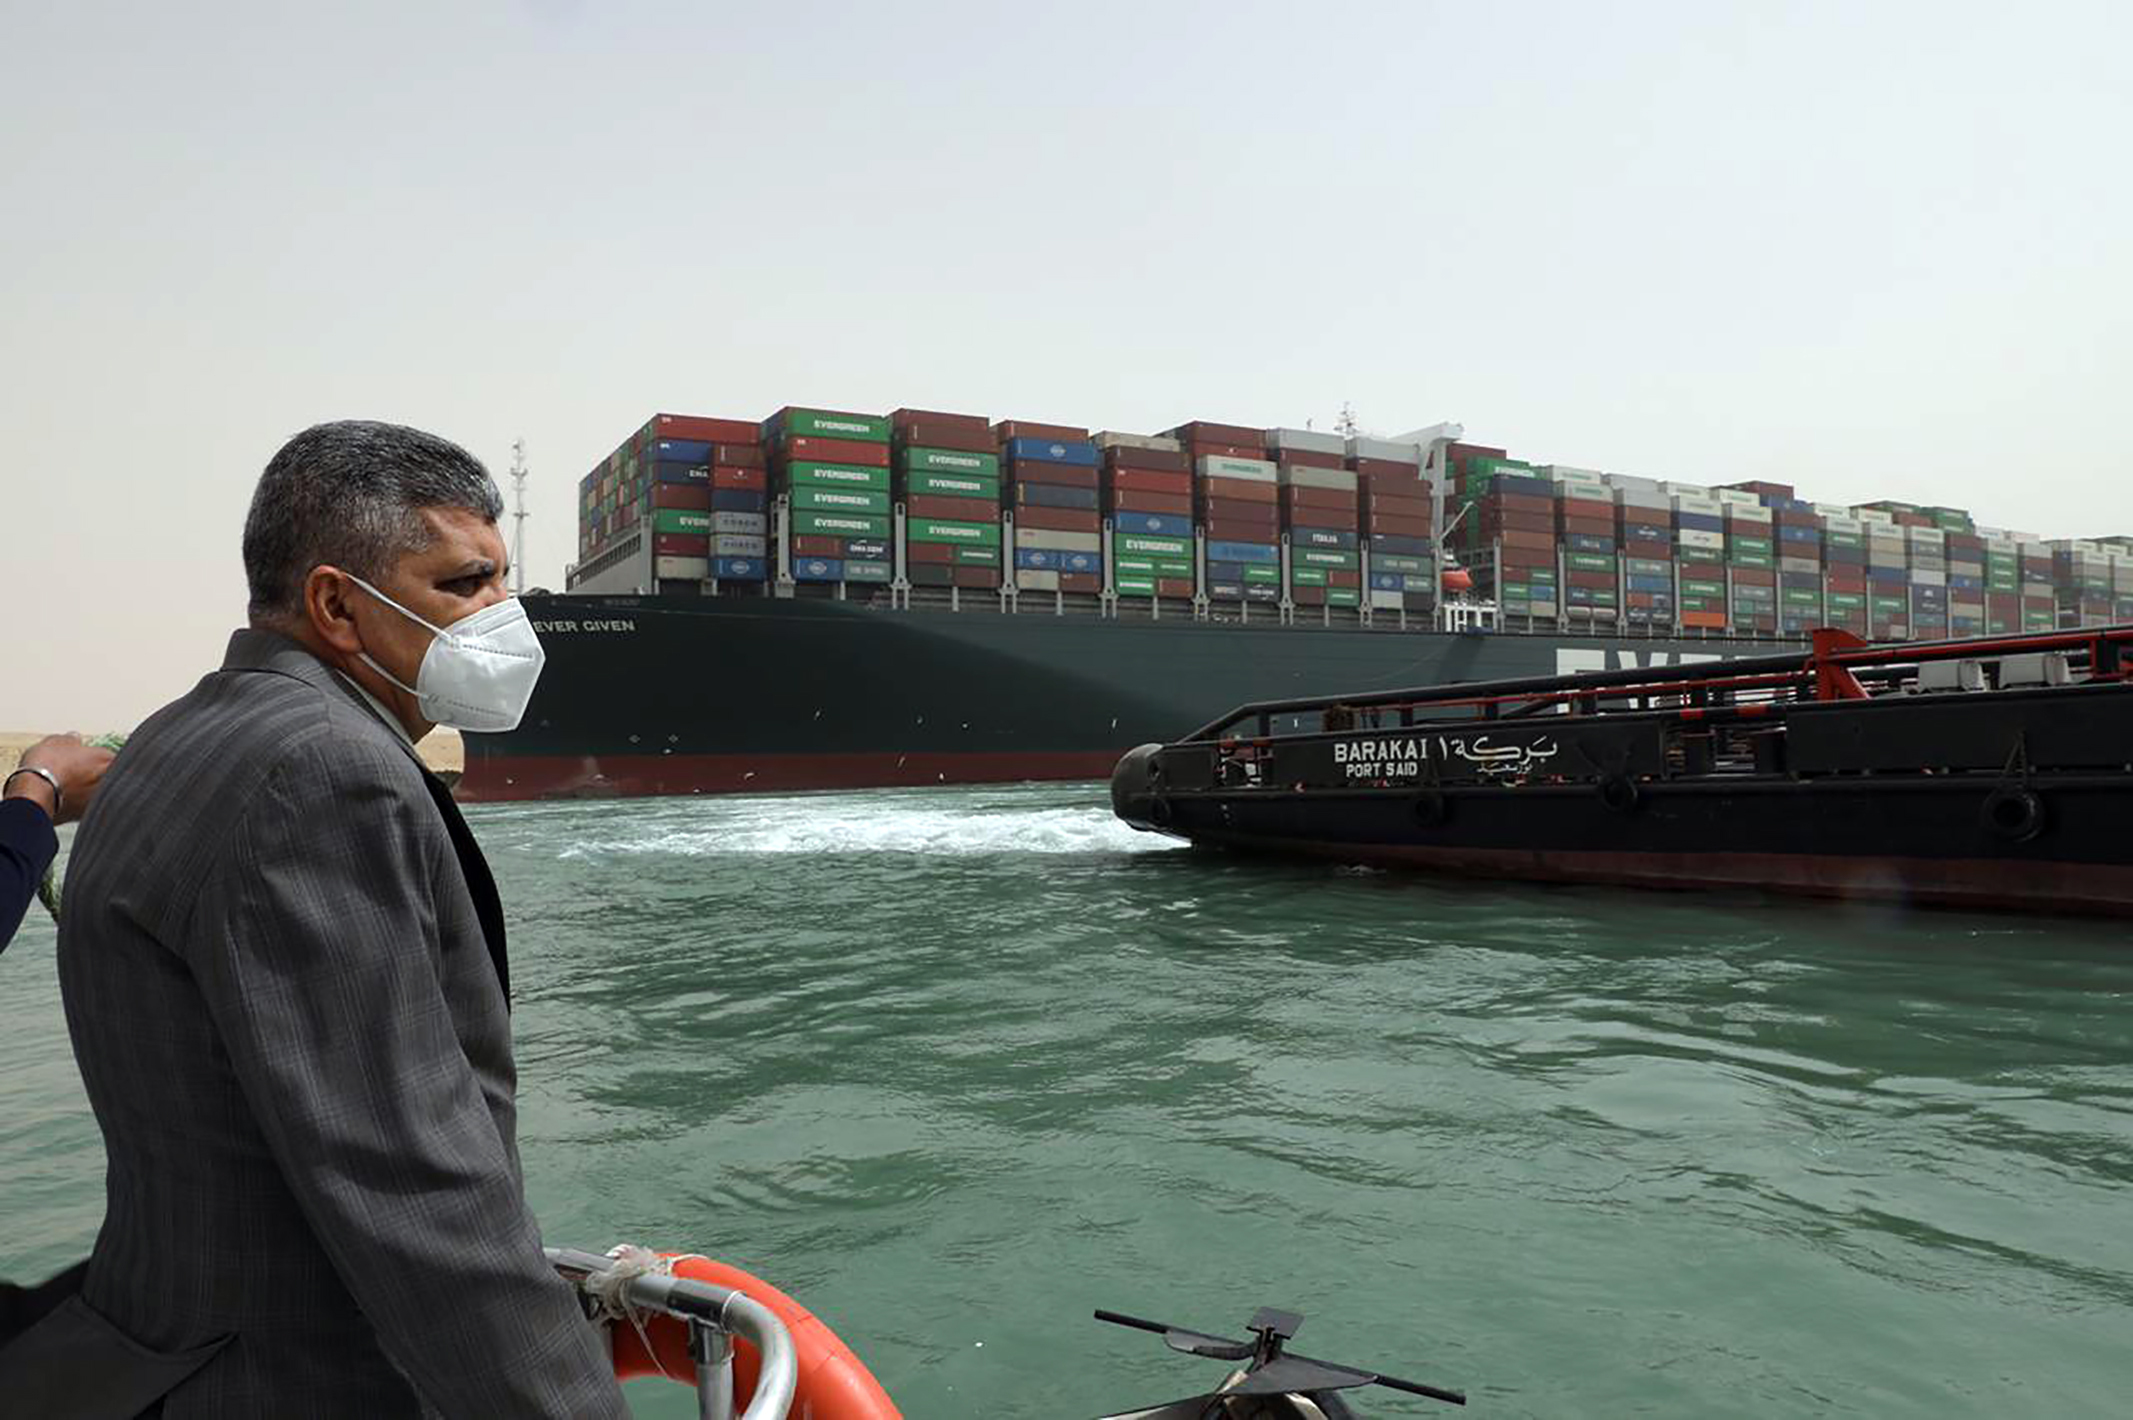 This photo released by the Suez Canal Authority on Thursday, March 25, 2021, shows Lt. Gen. Ossama Rabei, head of the Suez Canal Authority, investigating the situation with the Ever Given, a Panama-flagged cargo ship, after it become wedged across the Suez Canal and blocking traffic in the vital waterway. An operation is underway to try to work free the ship, which further imperiled global shipping Thursday as at least 150 other vessels needing to pass through the crucial waterway idled waiting for the obstruction to clear. (Suez Canal Authority via AP)